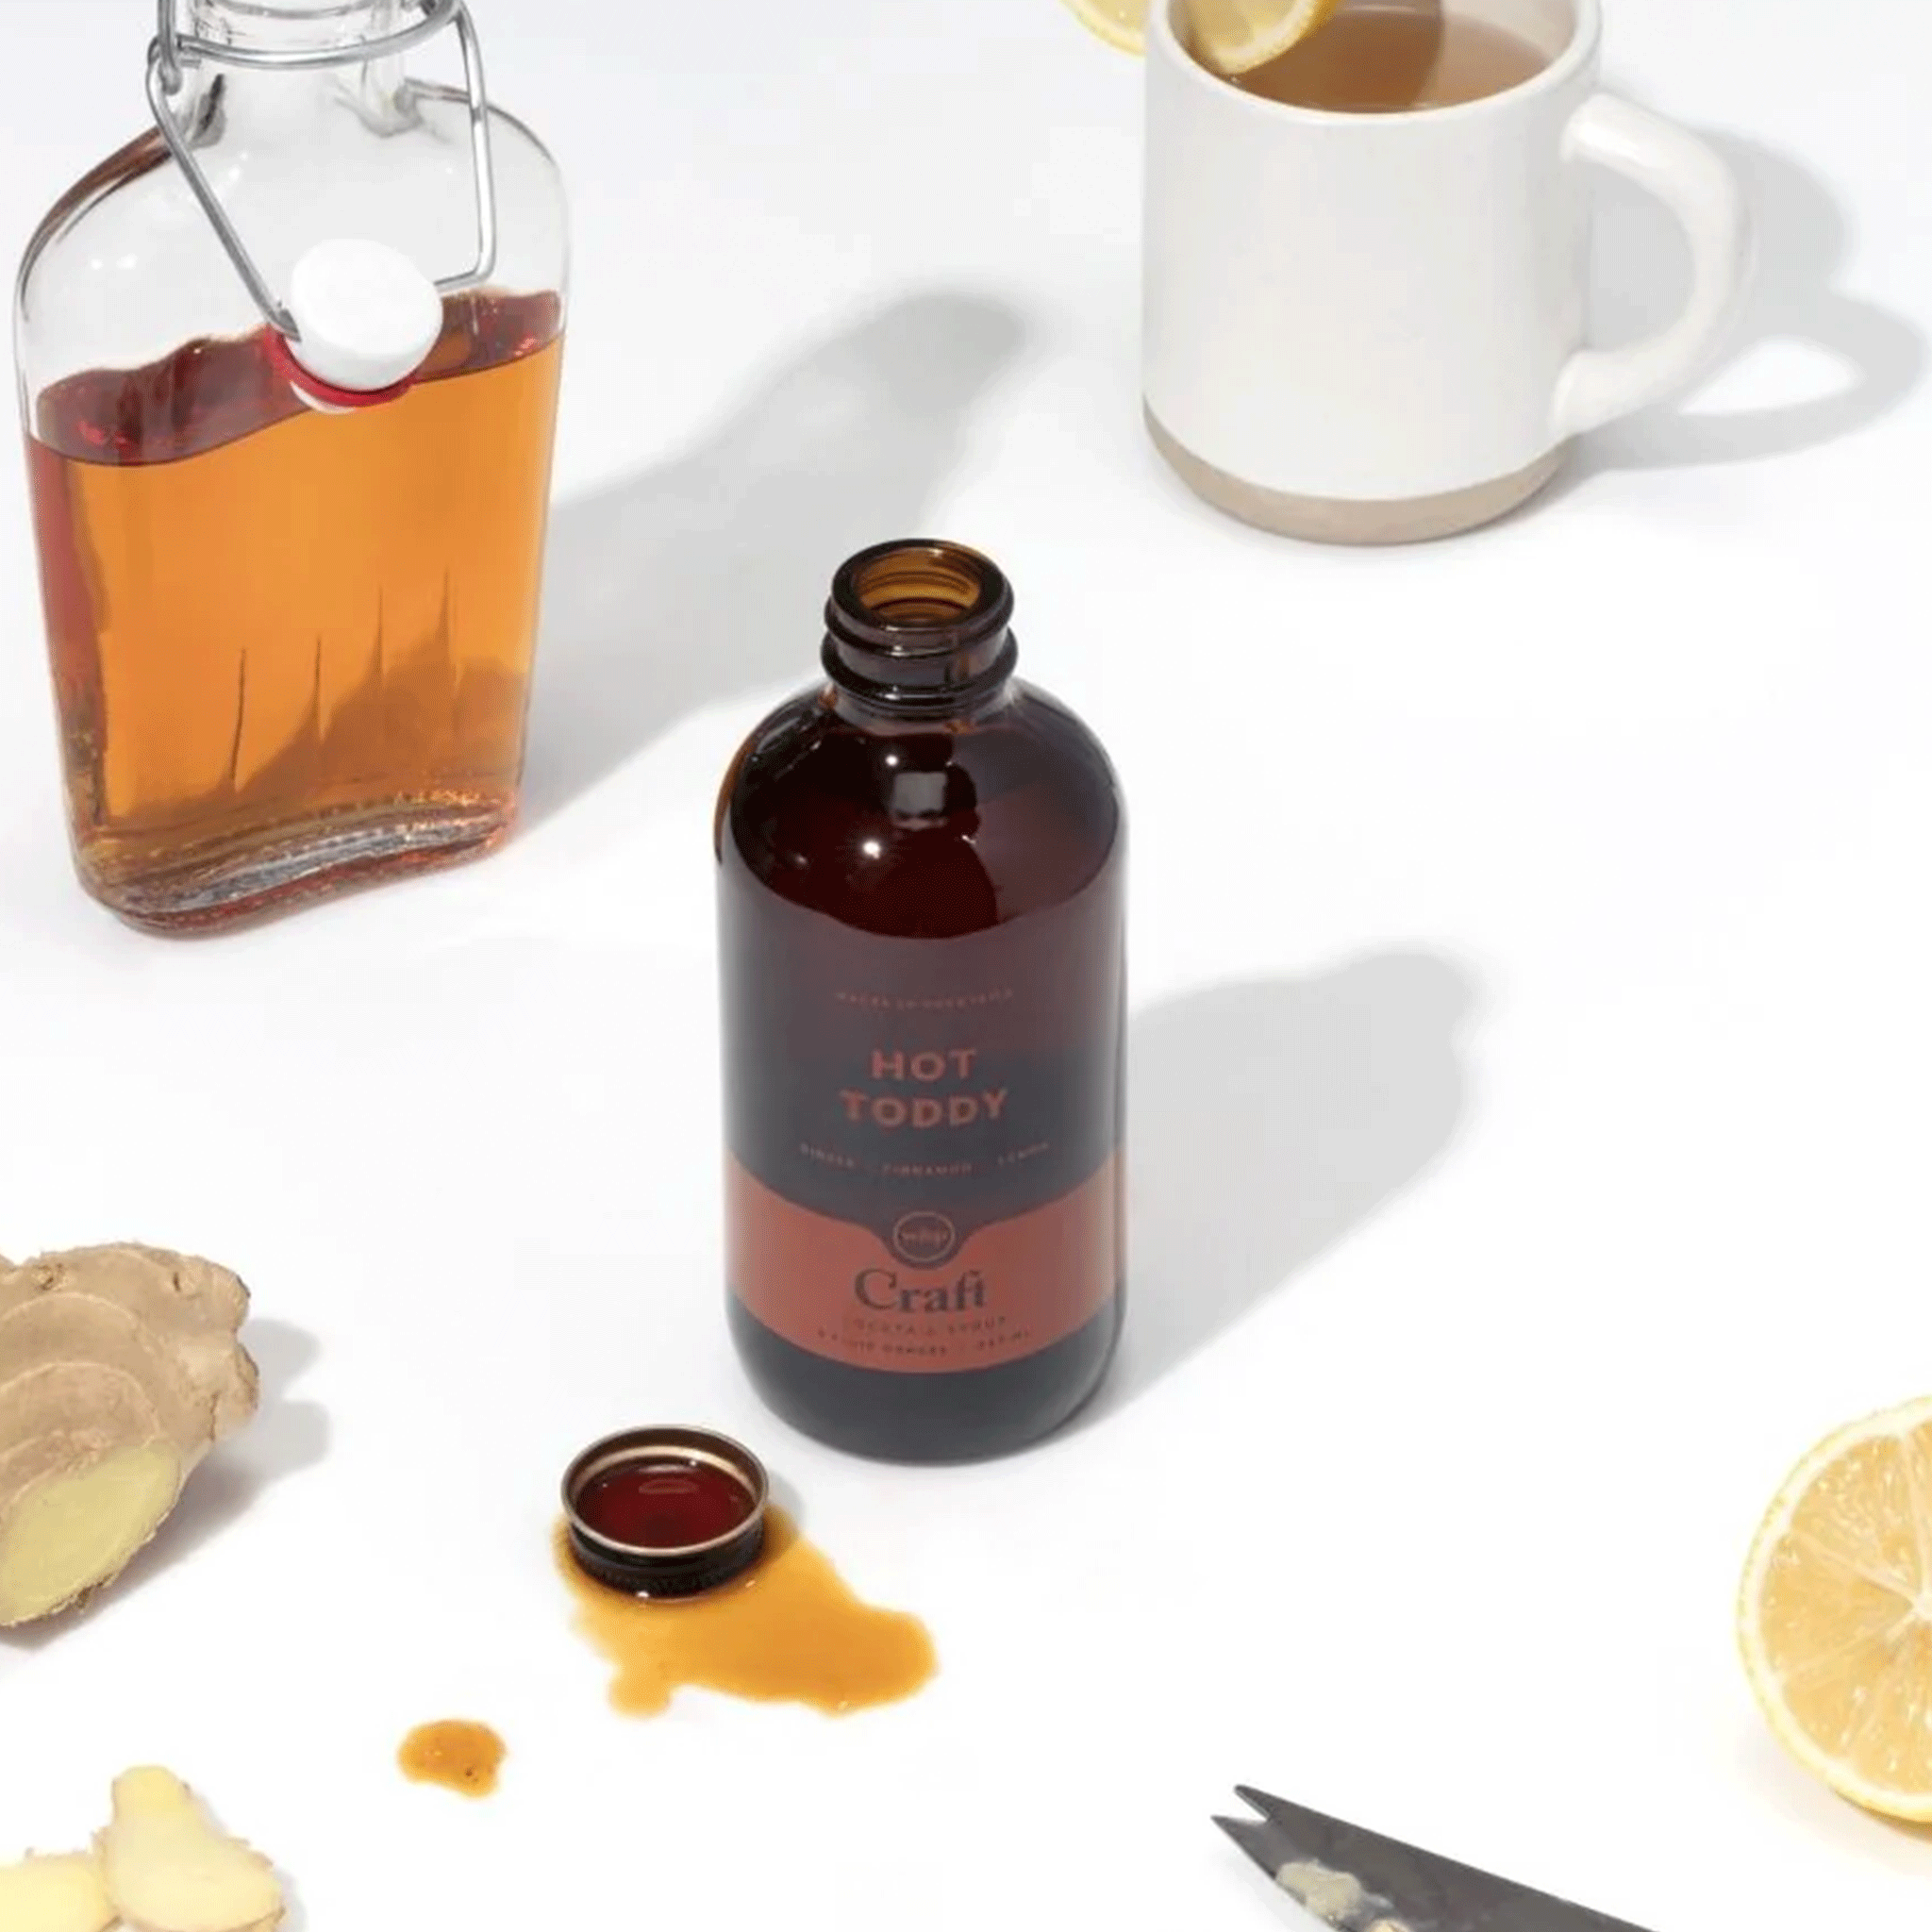 On a white counter is a bottle of hot toddy cocktail syrup in a brown glass bottle with a reddish label. 